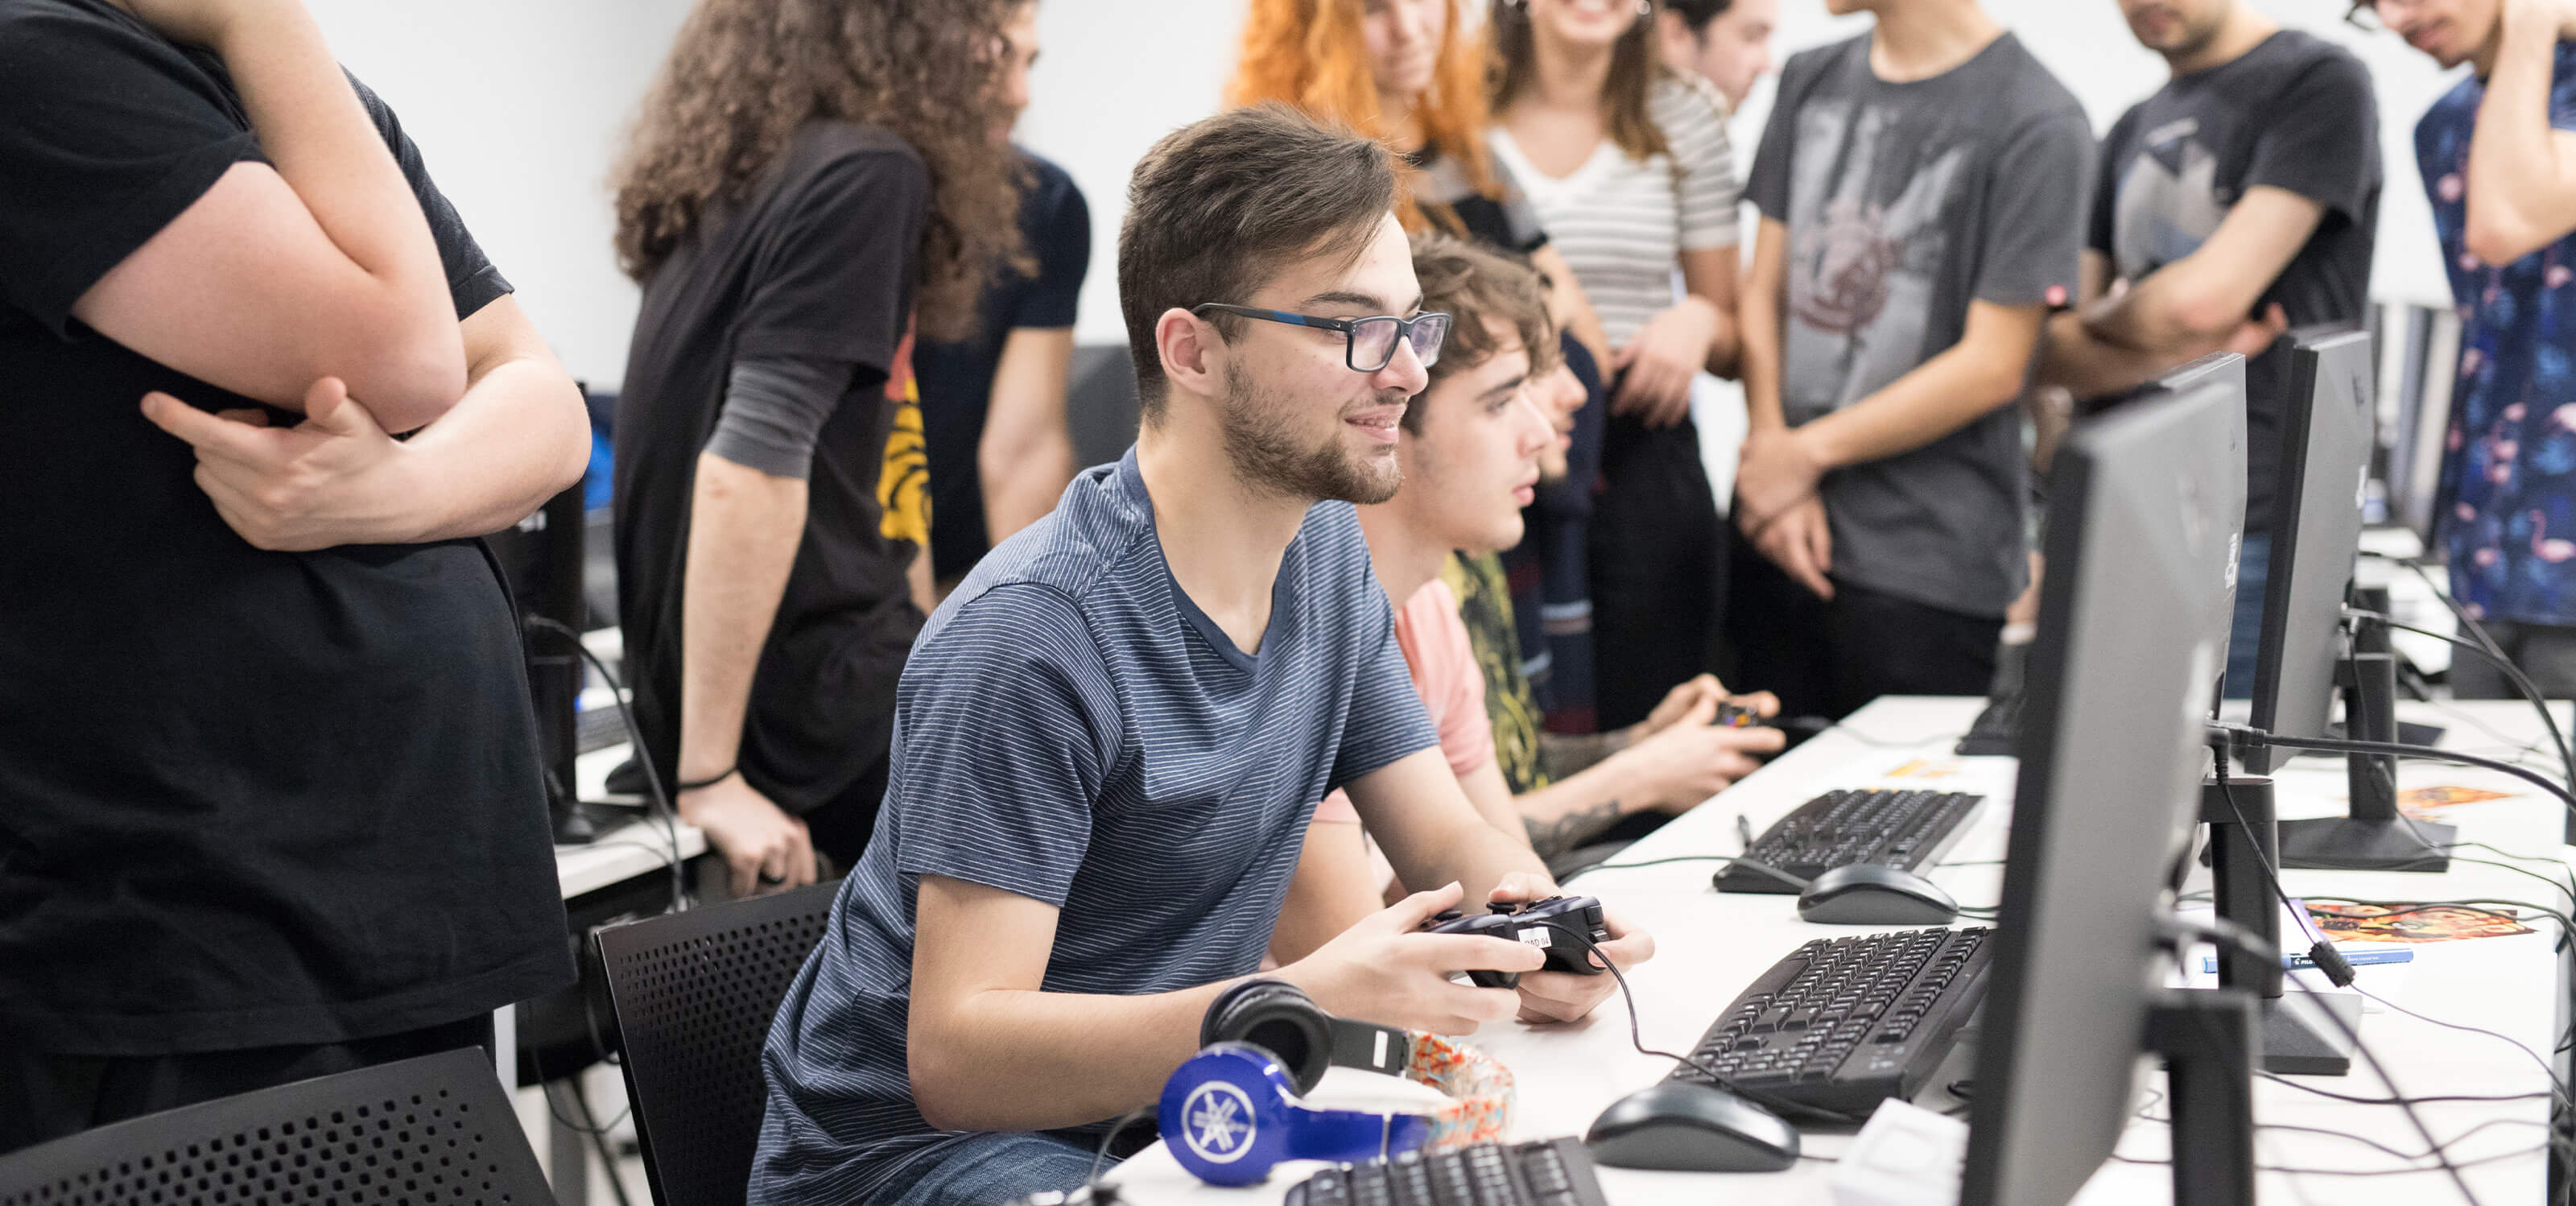 A student holds a controller and watches the monitor in front of him as his classmates surround the table.